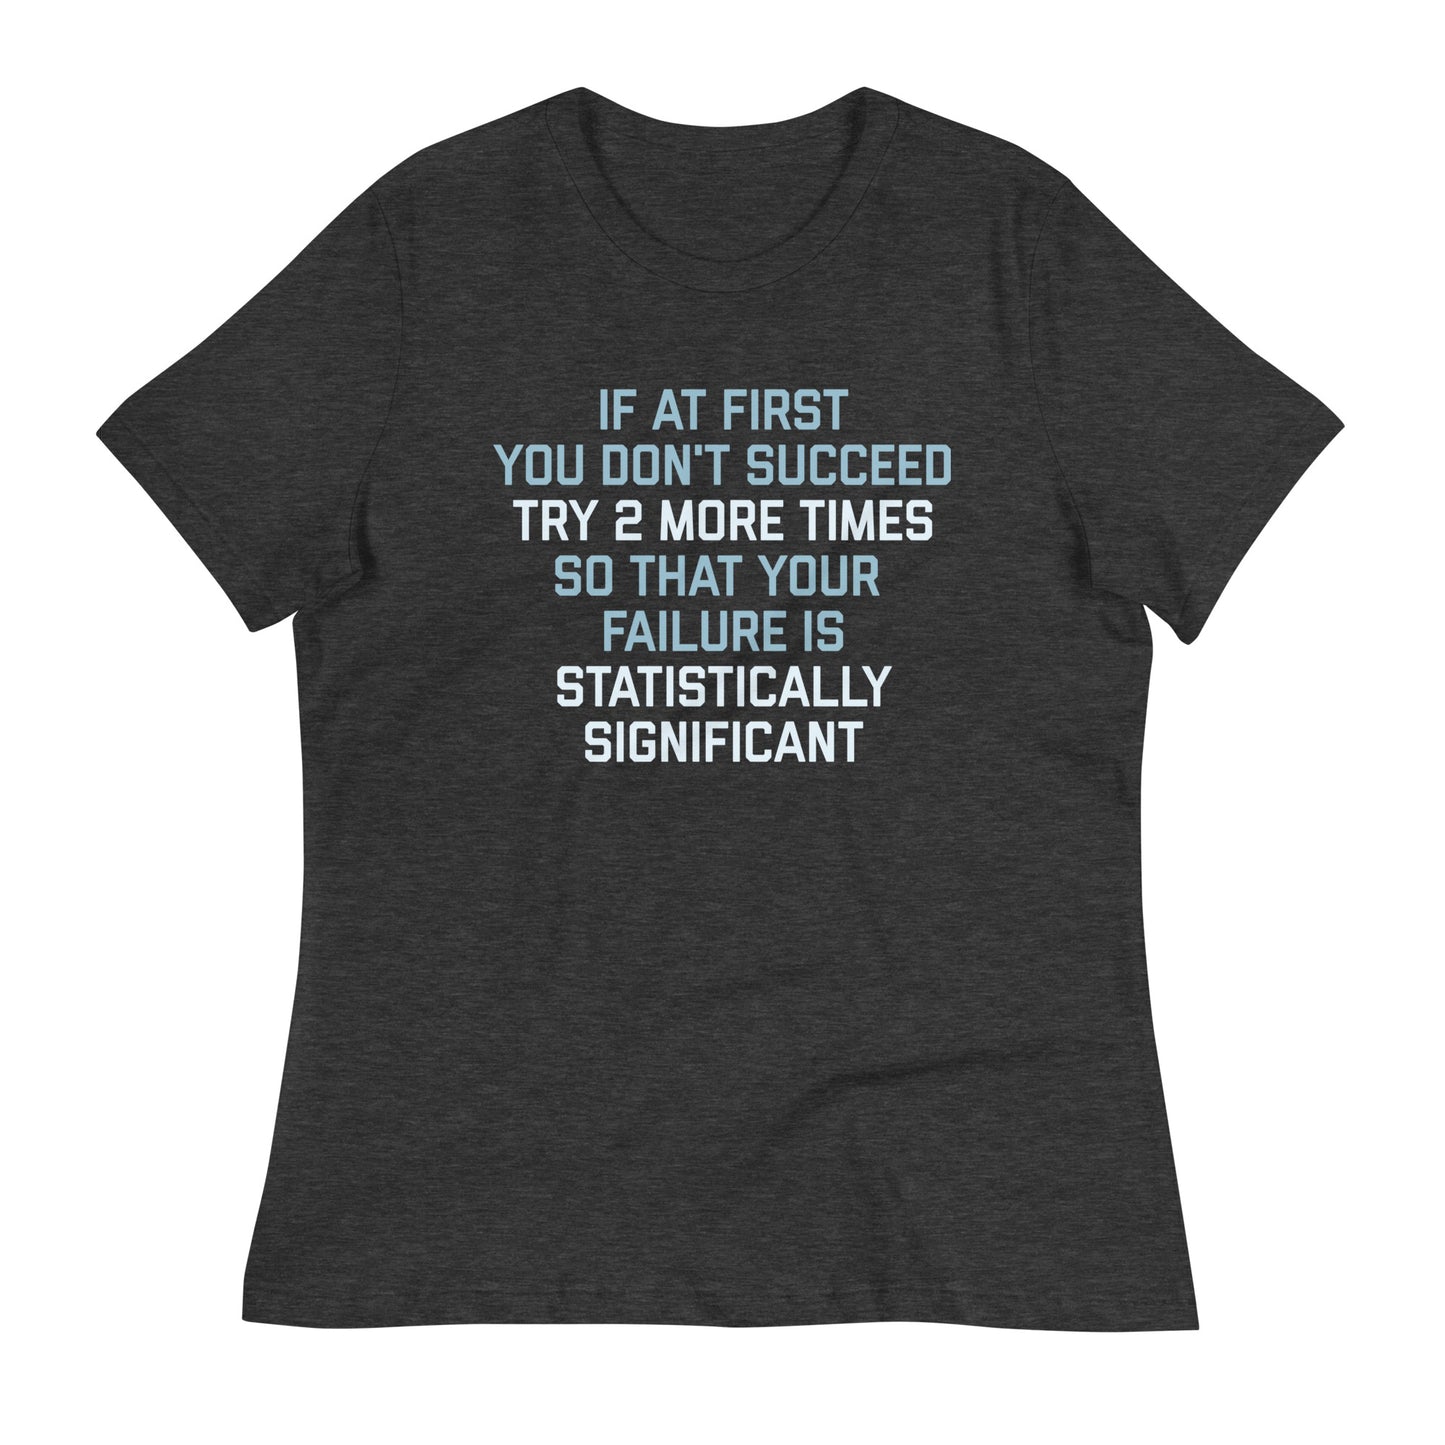 Try 2 More Times So That Your Failure Is Statistically Significant Women's Signature Tee